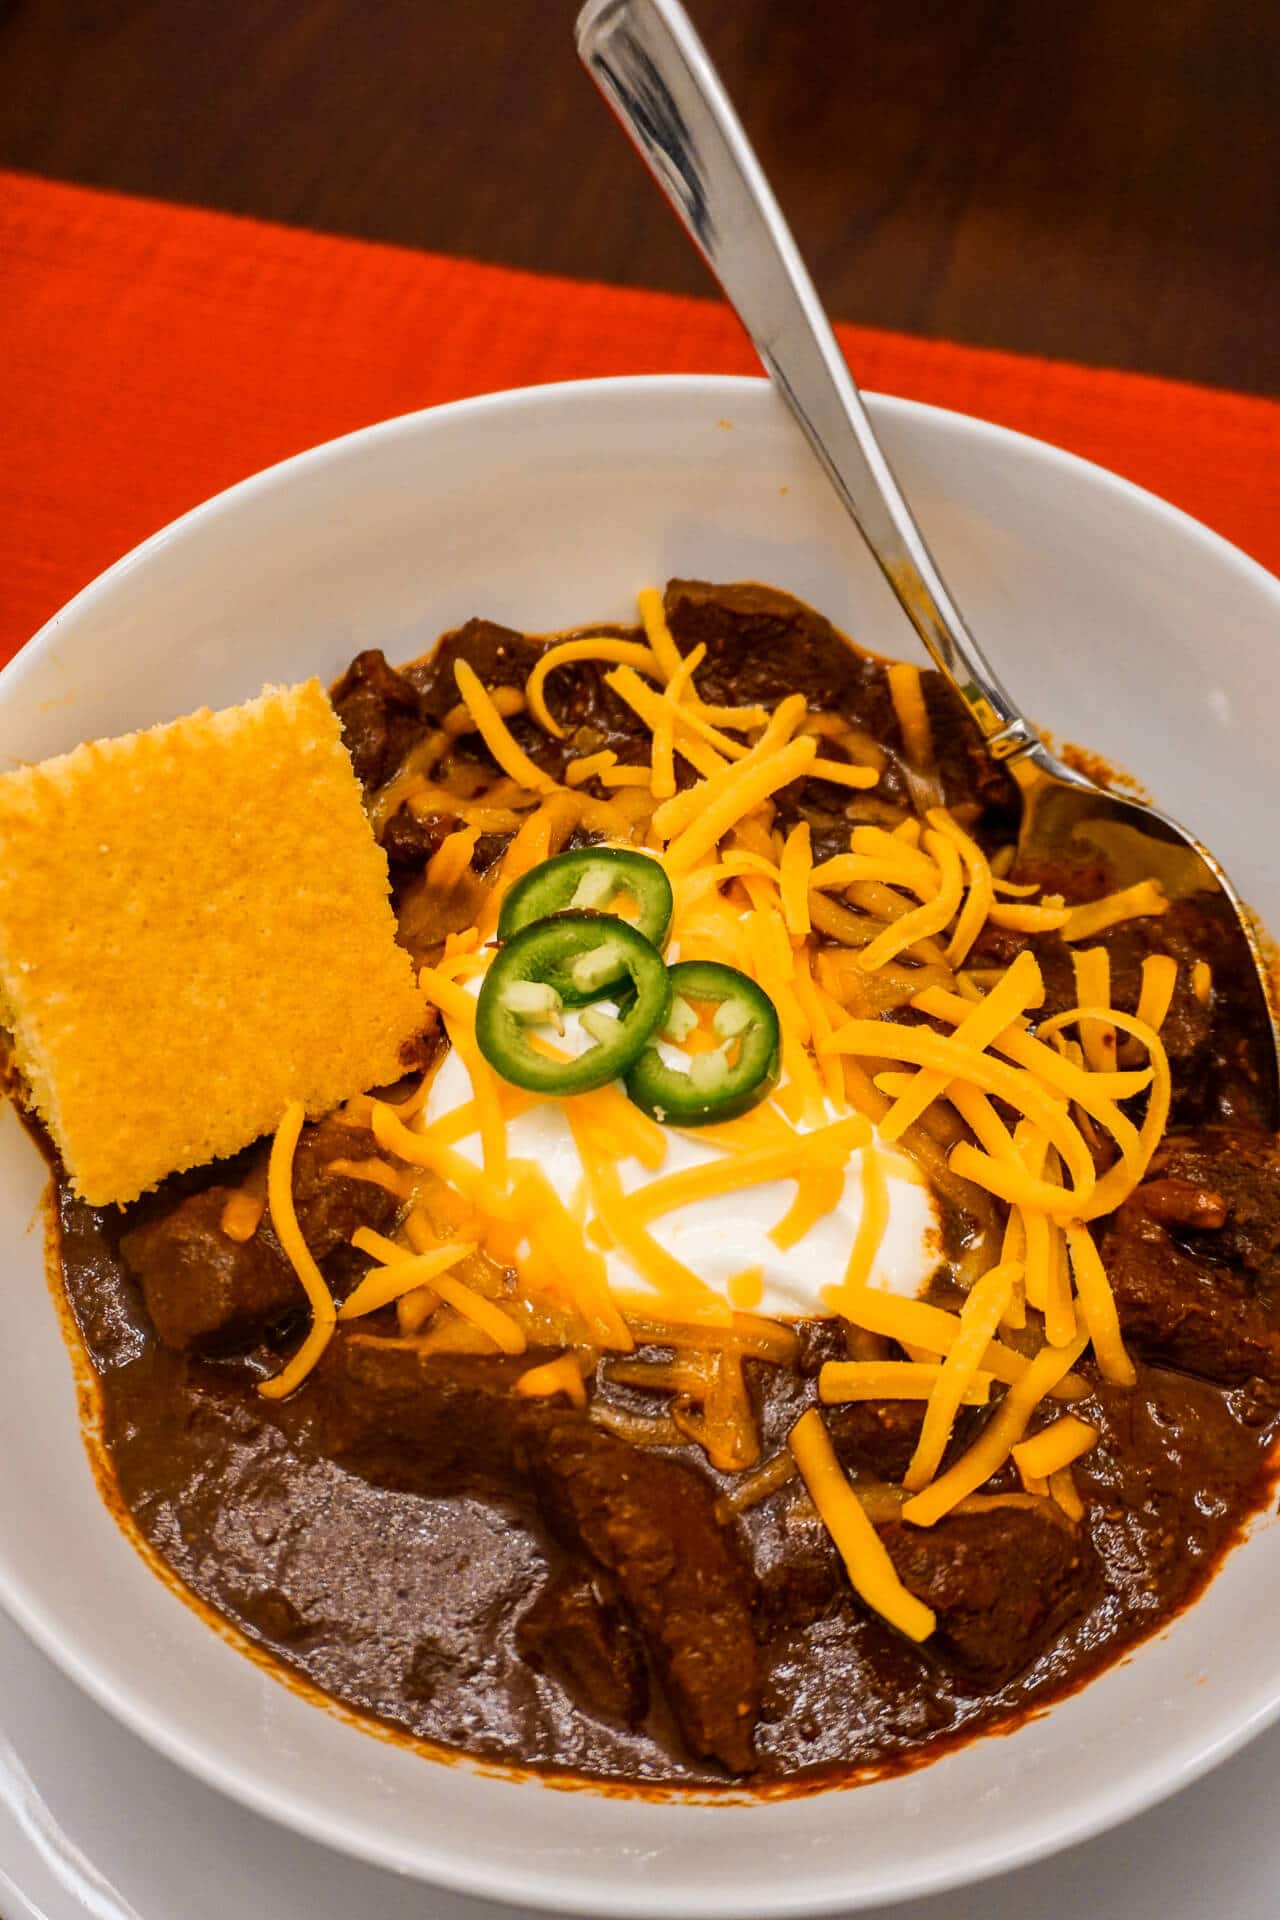 The Best Texas Chili - Authentic Recipe from a Born and Raised Texan